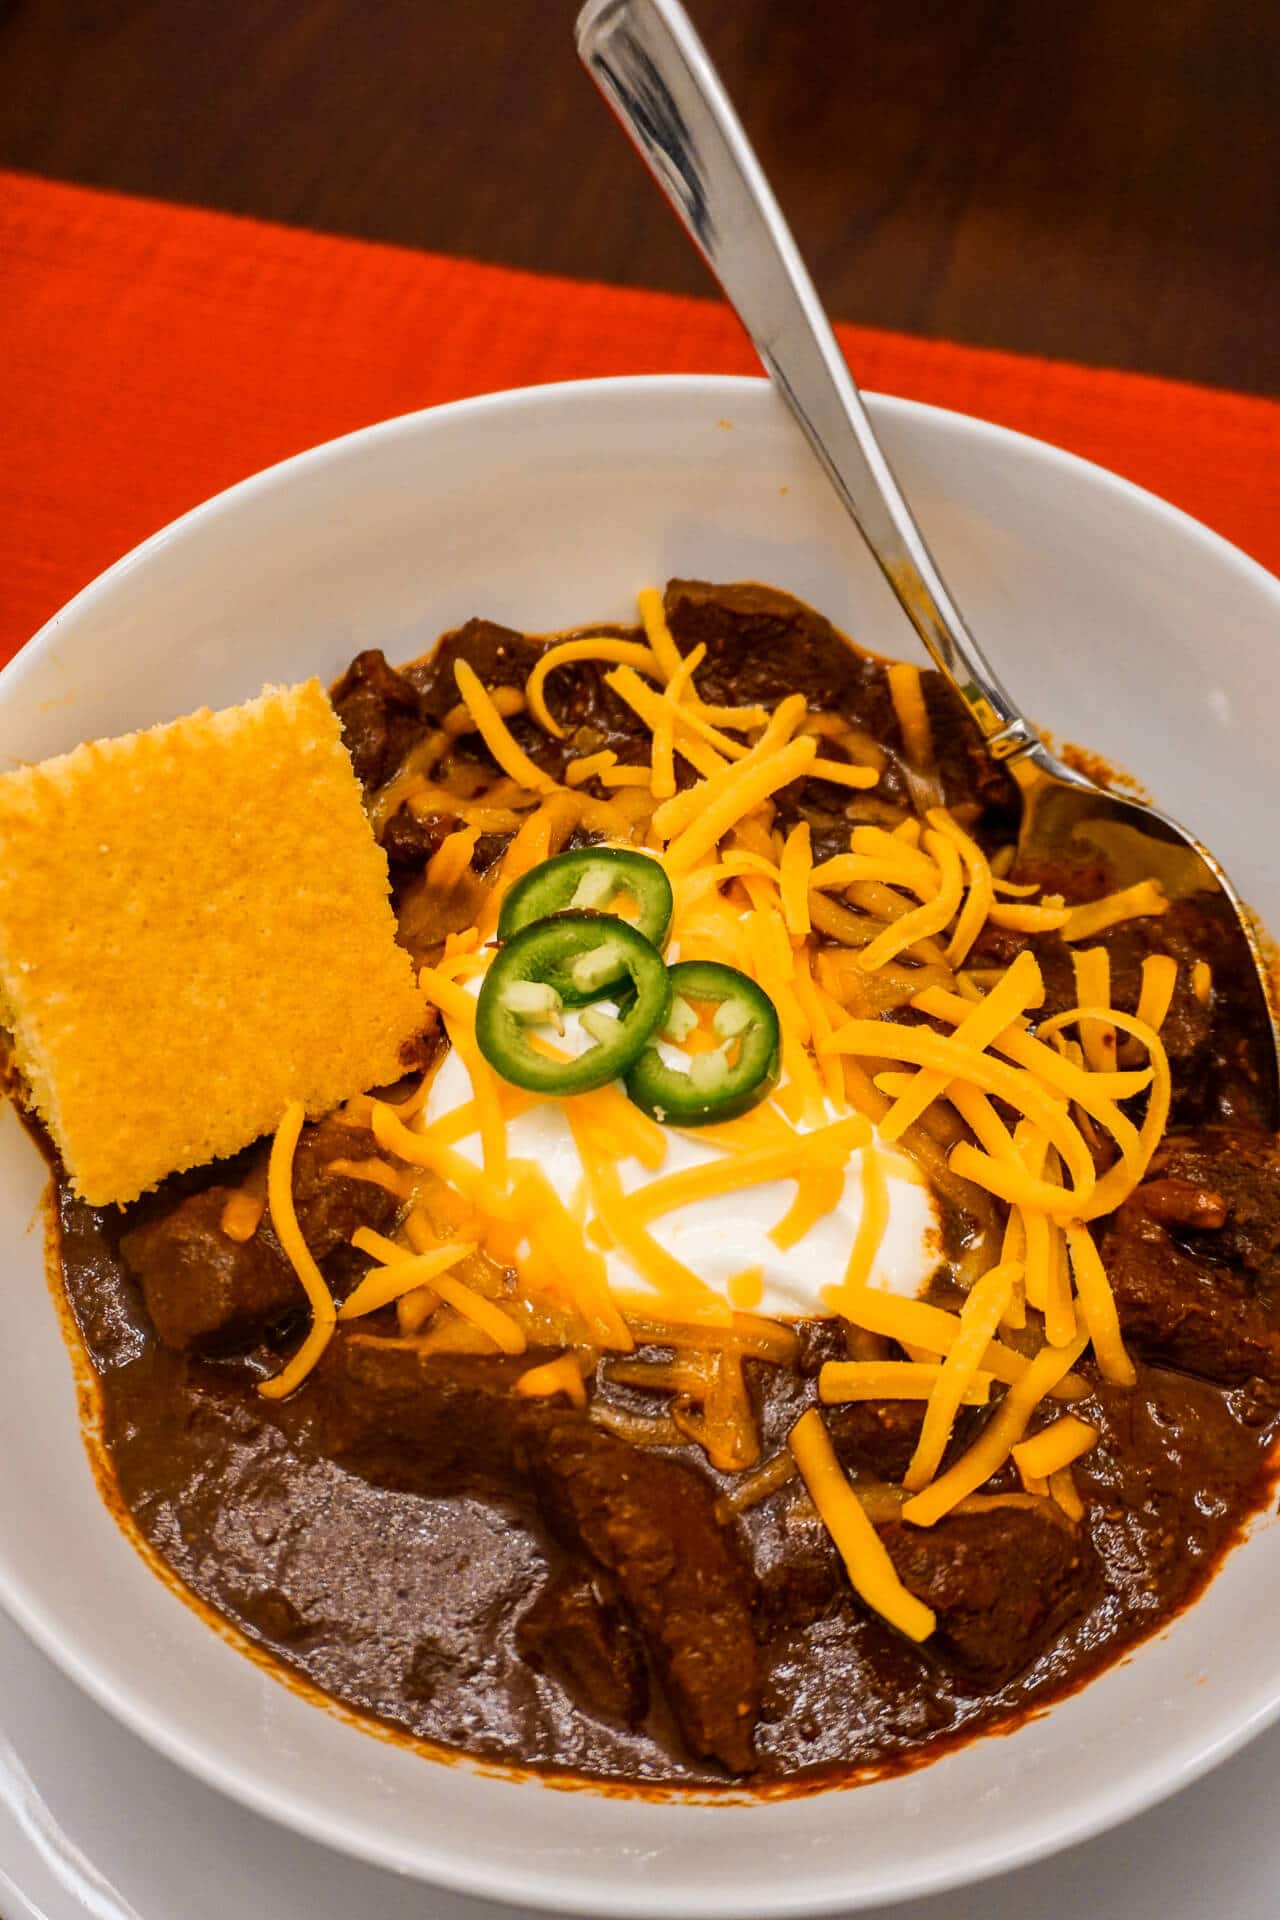 The Best Texas Chili - Authentic Recipe from a Born and Raised Texan